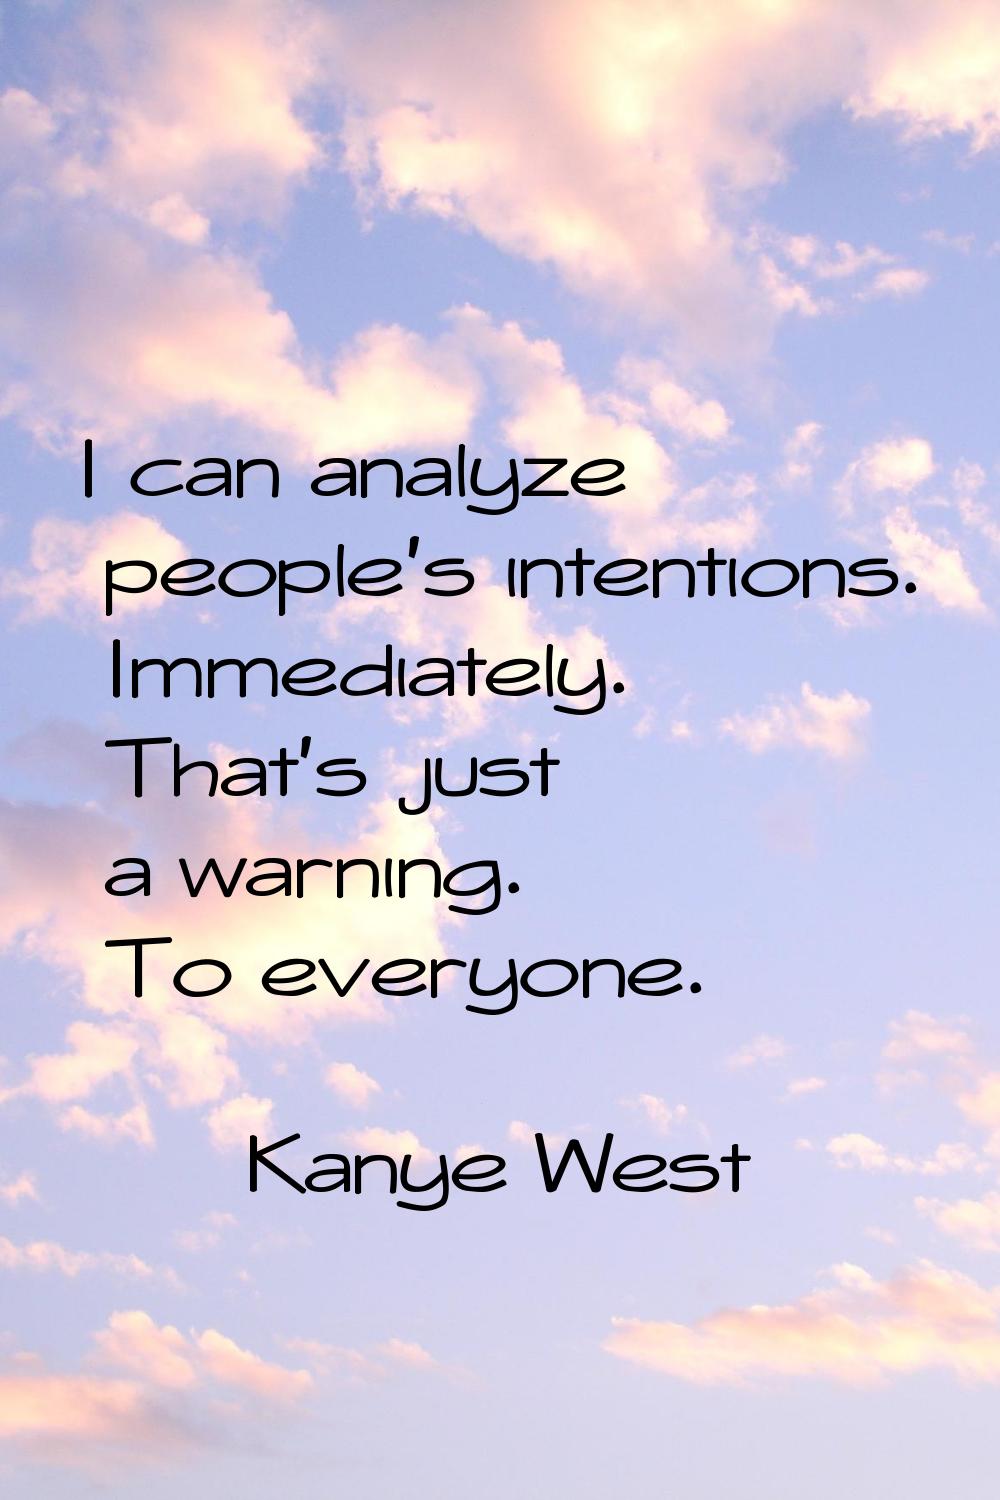 I can analyze people's intentions. Immediately. That's just a warning. To everyone.